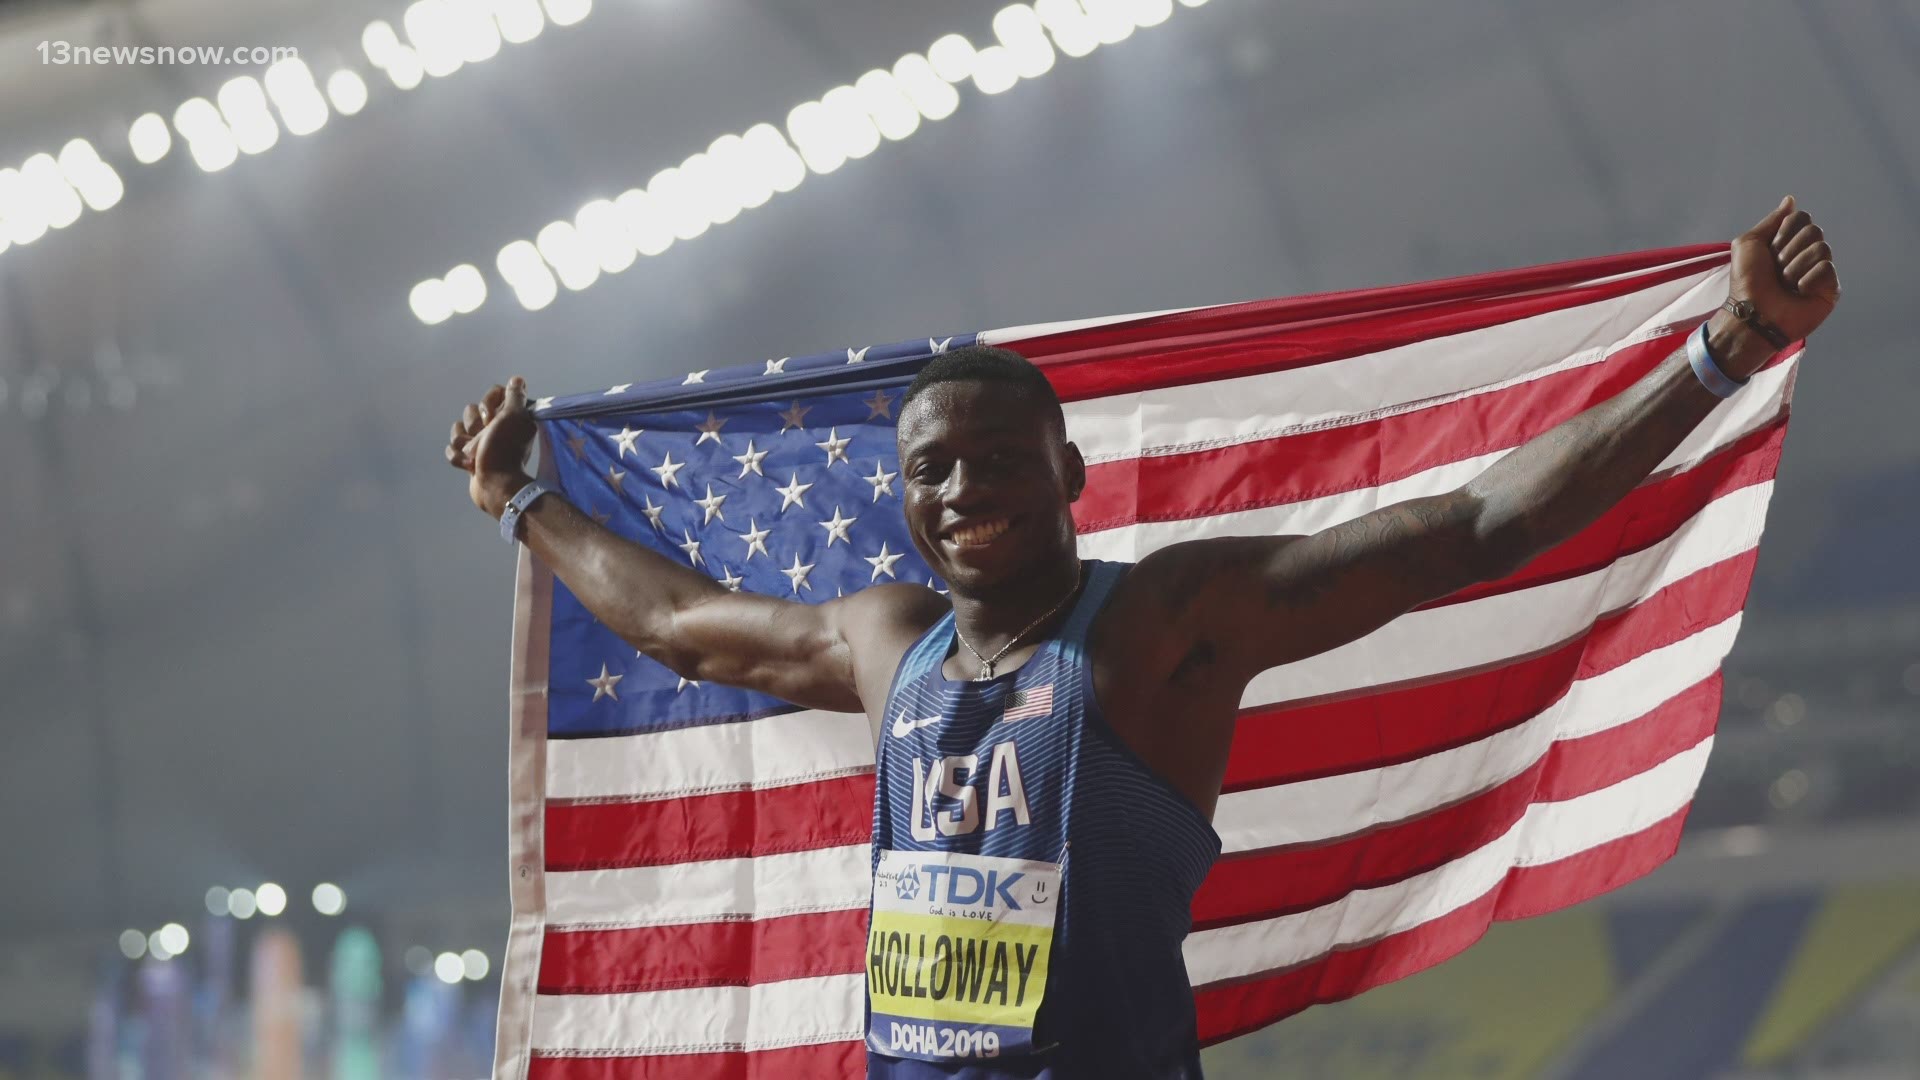 Our area's greatest hope to win gold in the Olympics, Holloway is the reigning world champ in the 110 meter hurdles